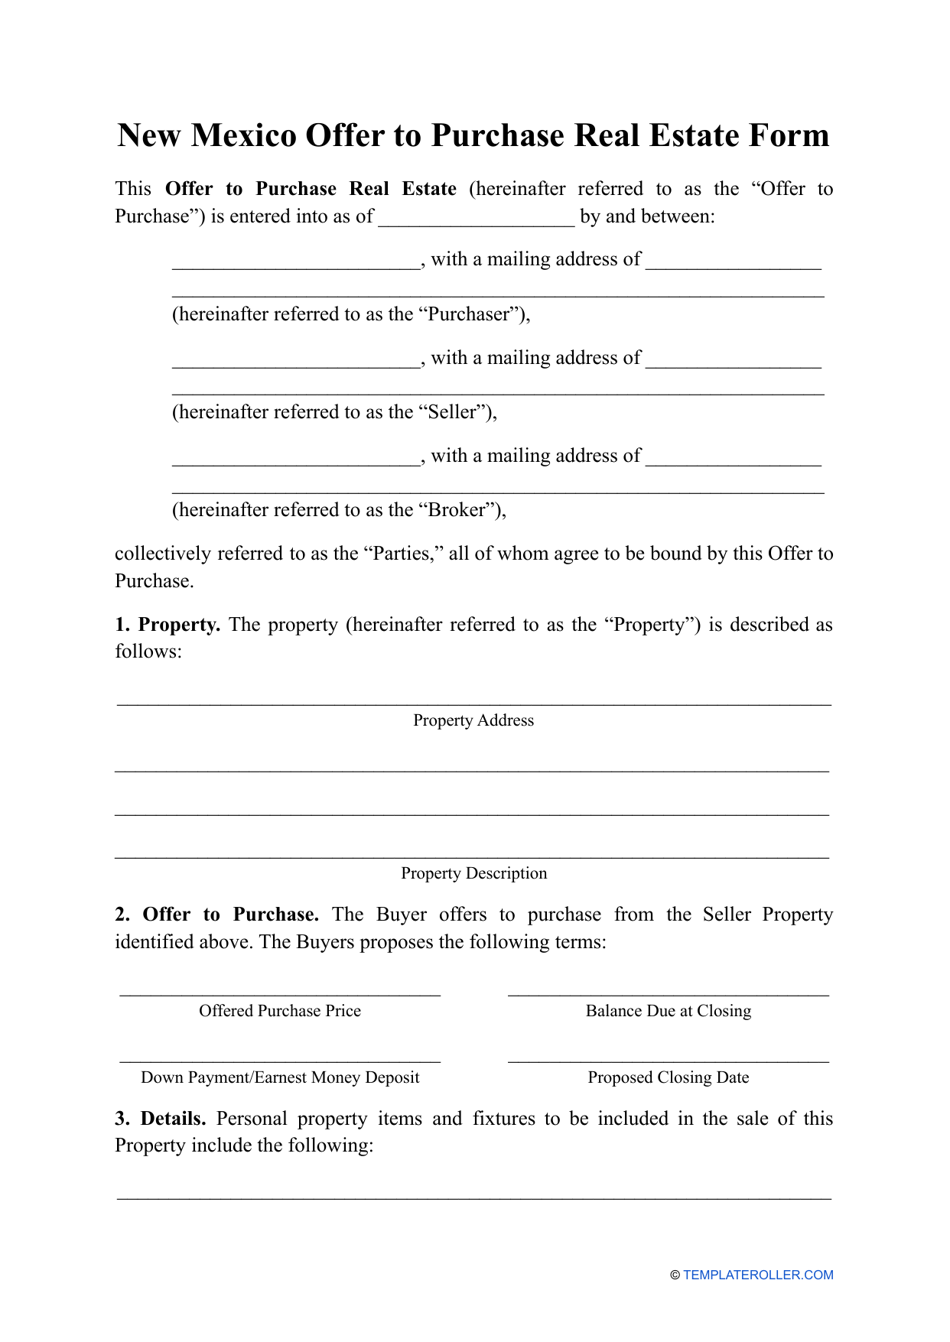 Offer to Purchase Real Estate Form - New Mexico, Page 1